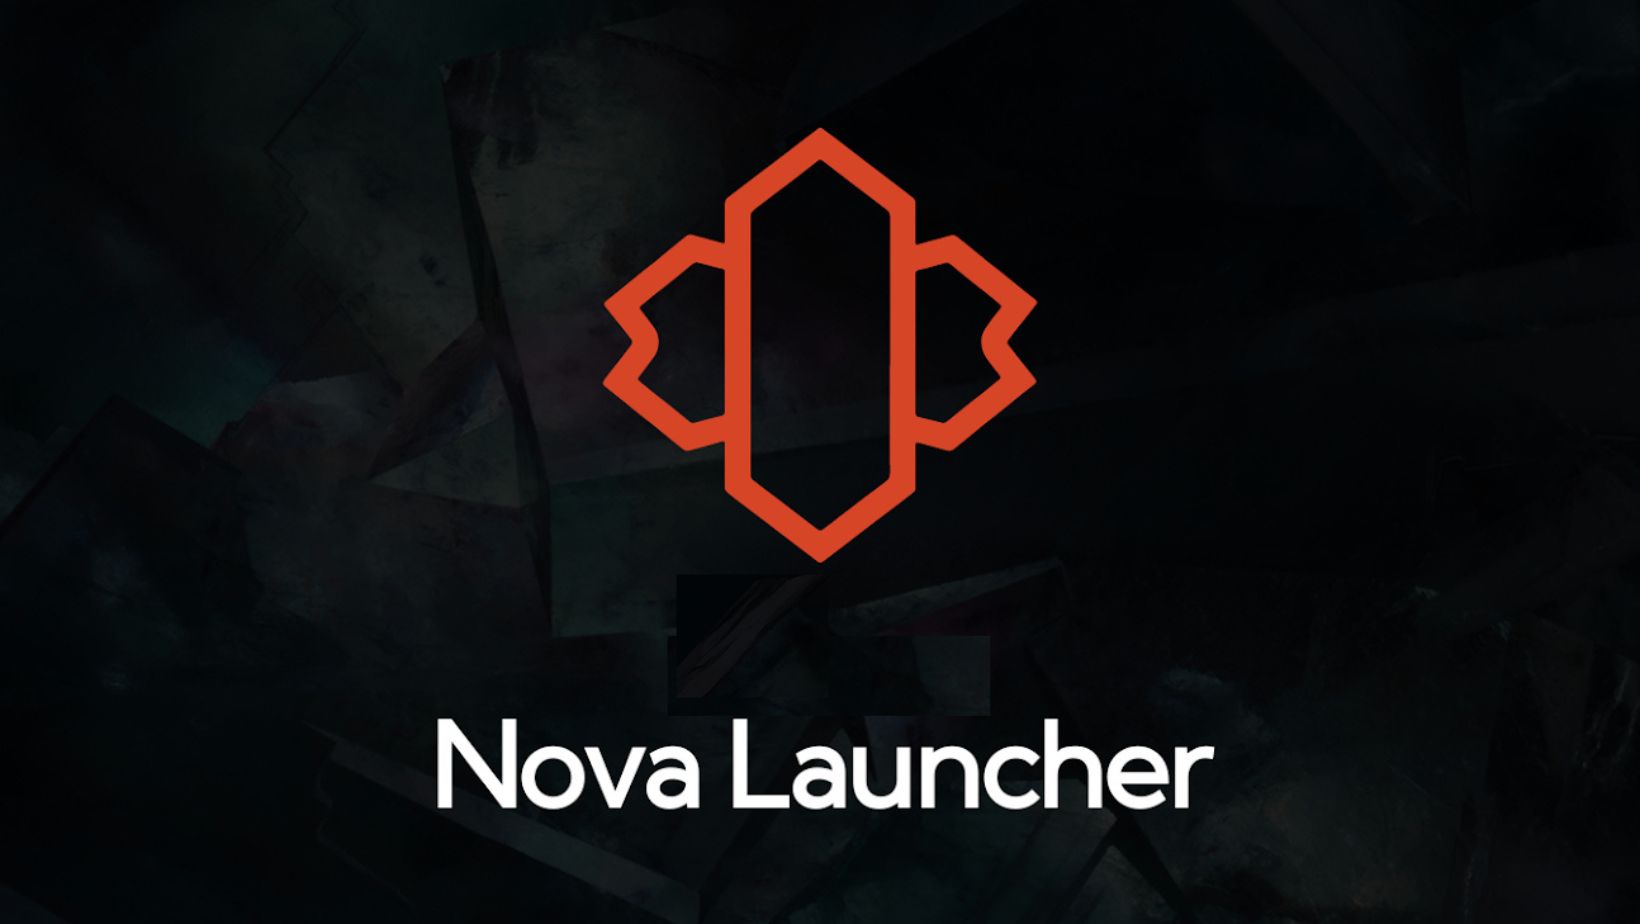 Most Popular Nova Launcher 8 Pushed to Stable on Play Store [APK Download]